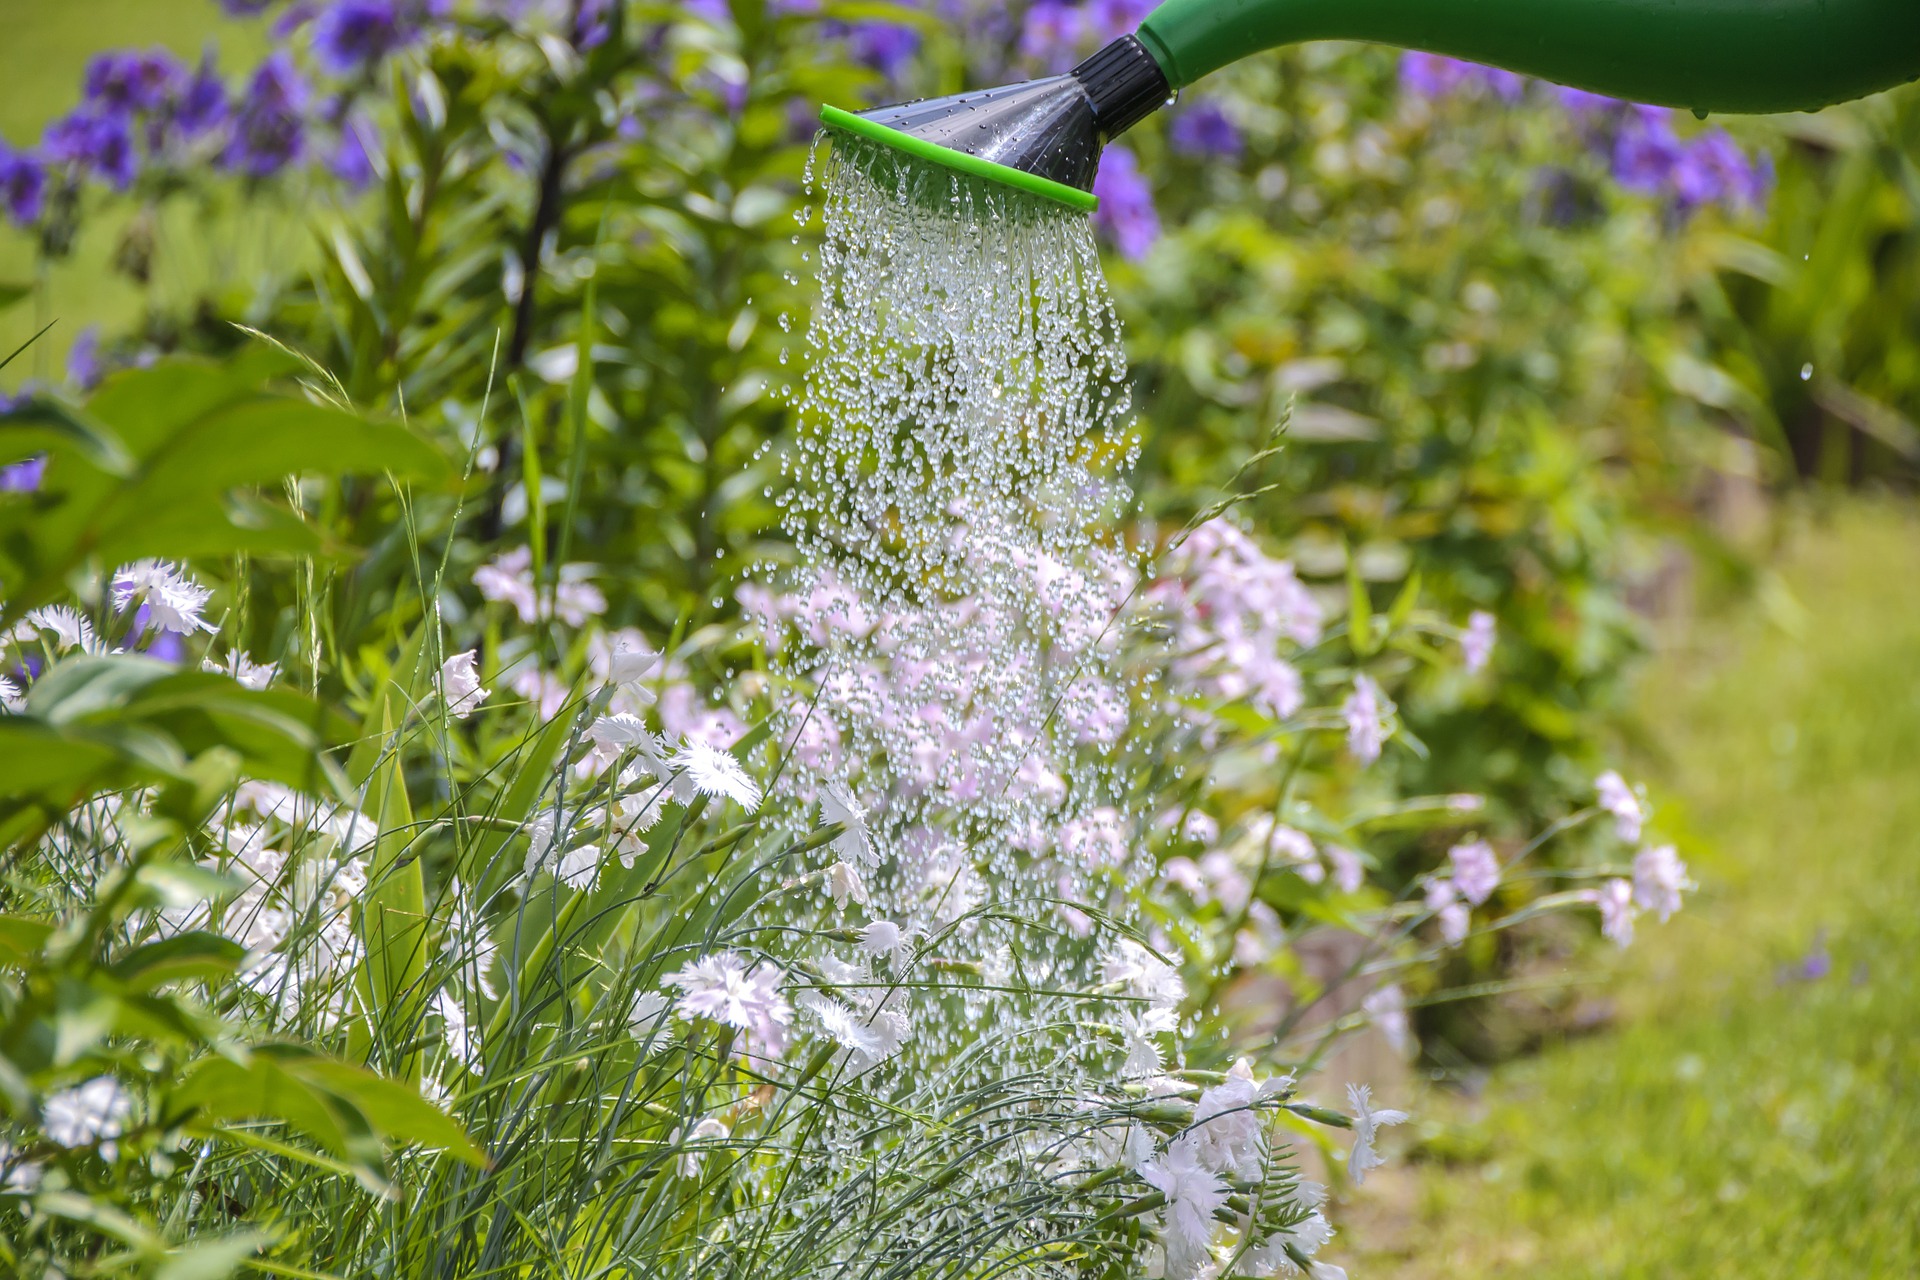 Although it may seem like watering and weeding are your only tasks this month, there’s still a lot to do. Help your garden beat the heat and prep for fall at the same time.